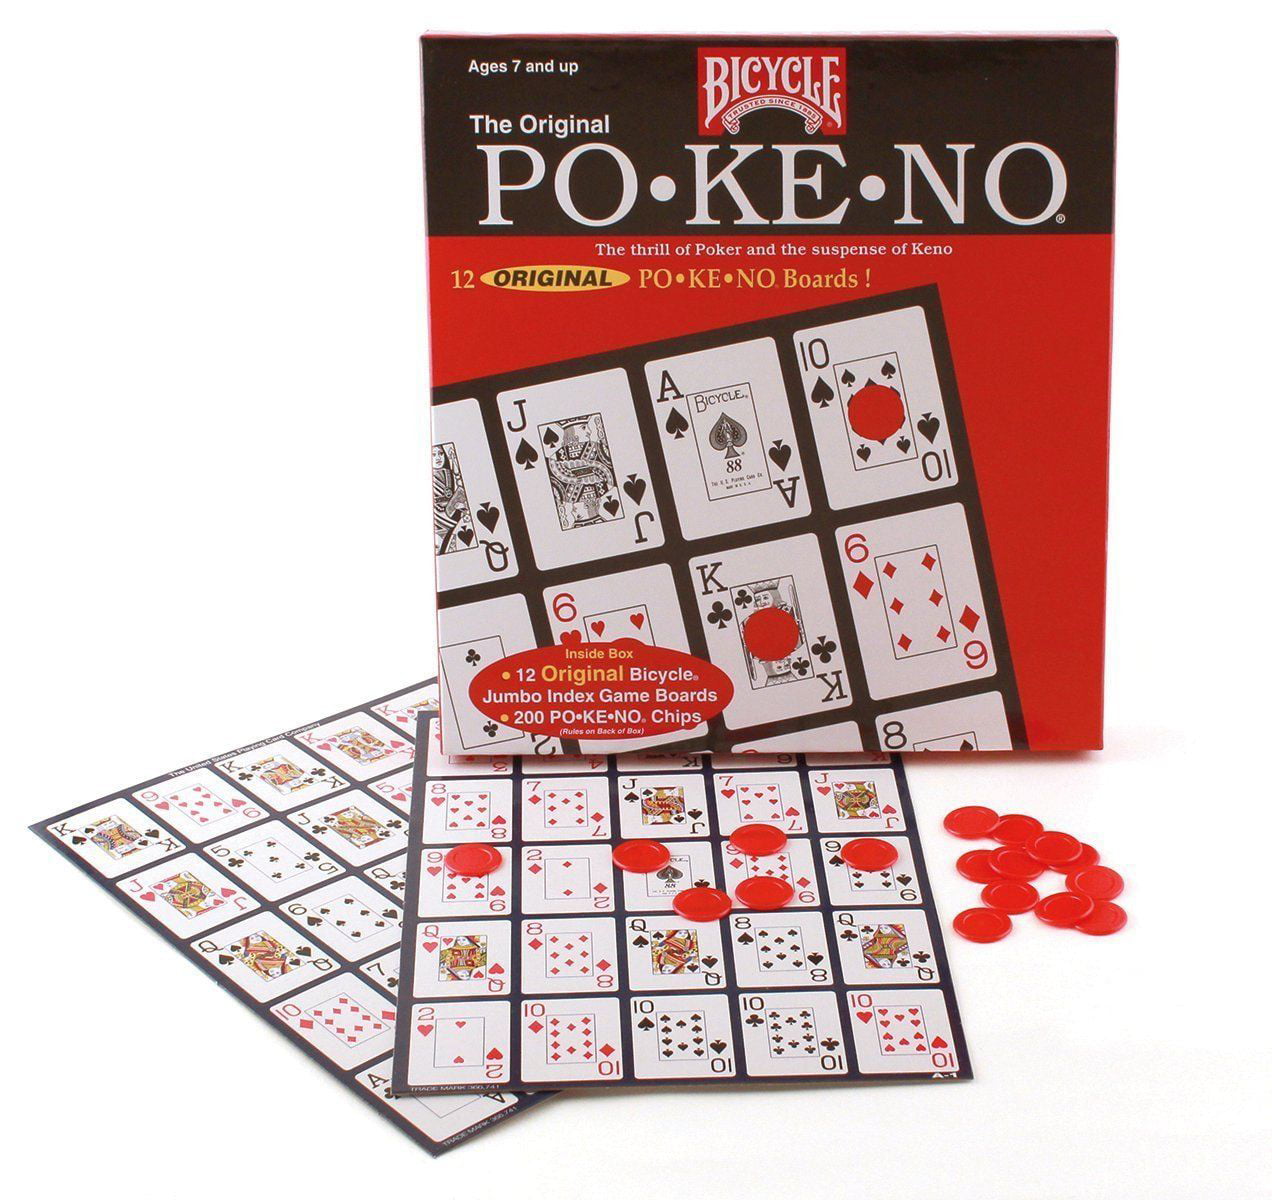 ORIGINAL POKENO GAME BY BICYCLE 12 UNIQUE BOARDS FOR UP TO 12 PLAYERS 